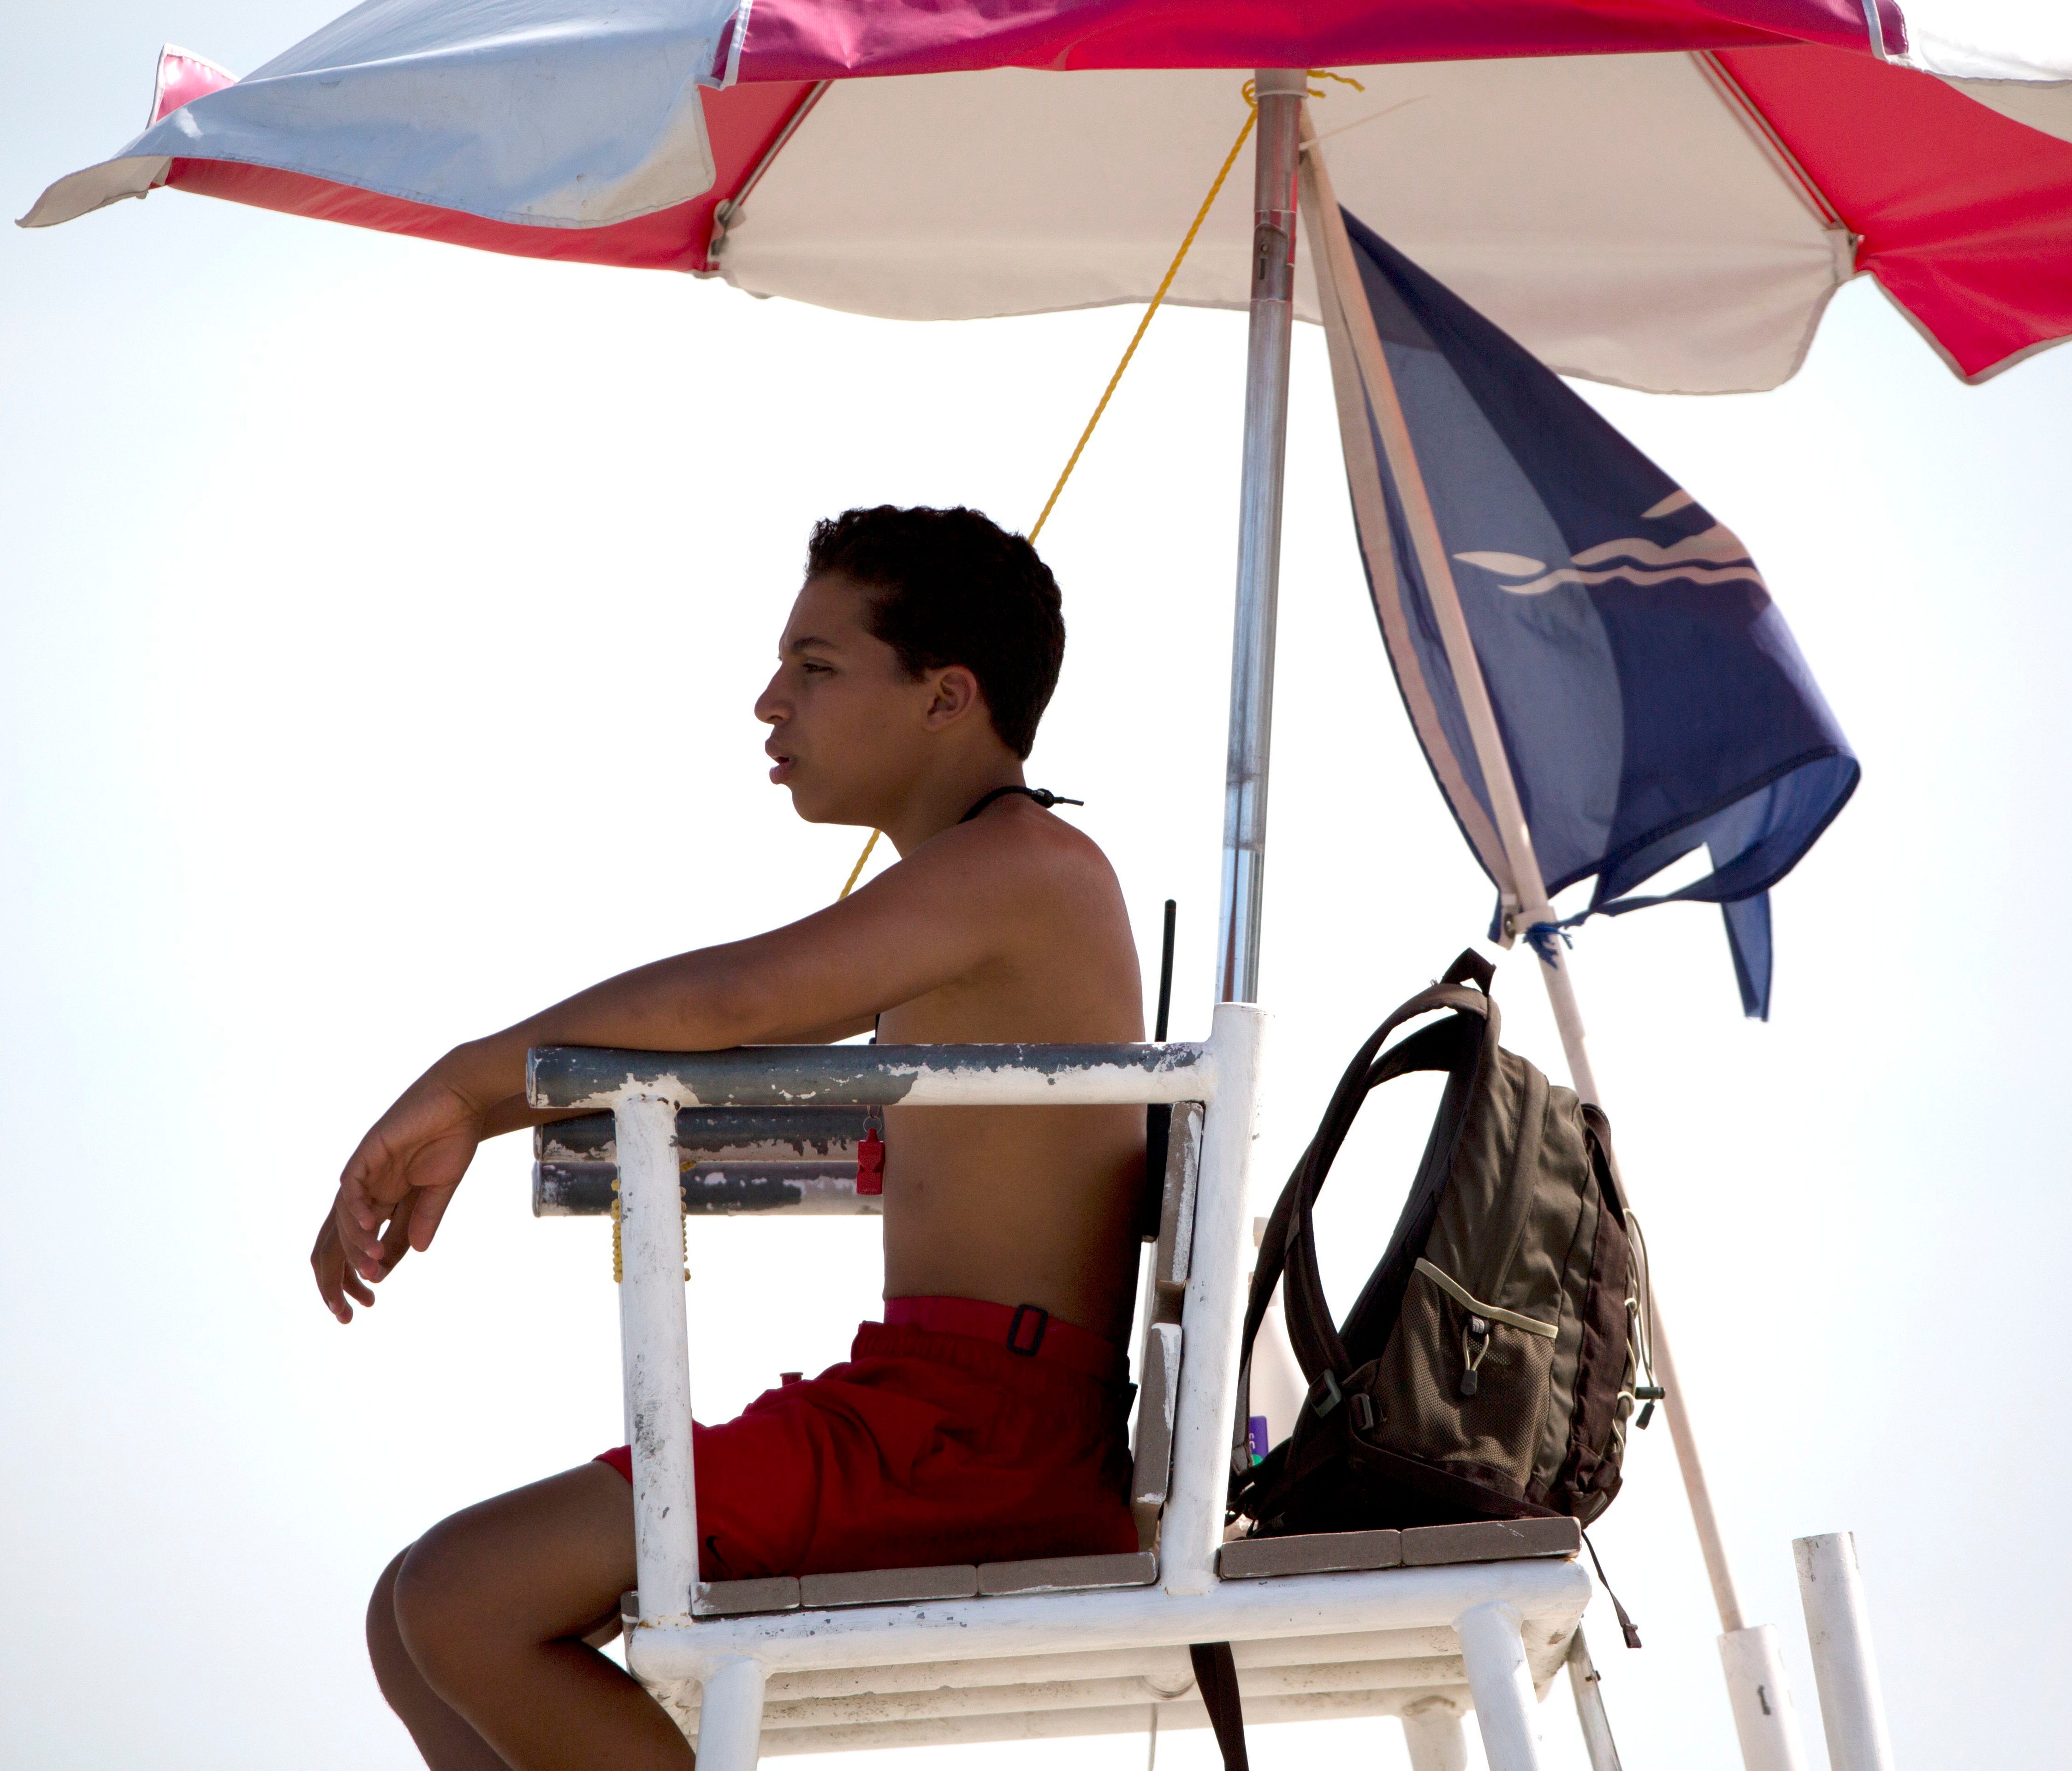 A lifeguard keeps watch at Revere Beach in Revere, Mass., Friday, July 21, 2017, in Revere, Mass. The temperature reached 90 degrees in the Boston area during the day. (AP Photo/Michael Dwyer) ORG XMIT: MAMD105